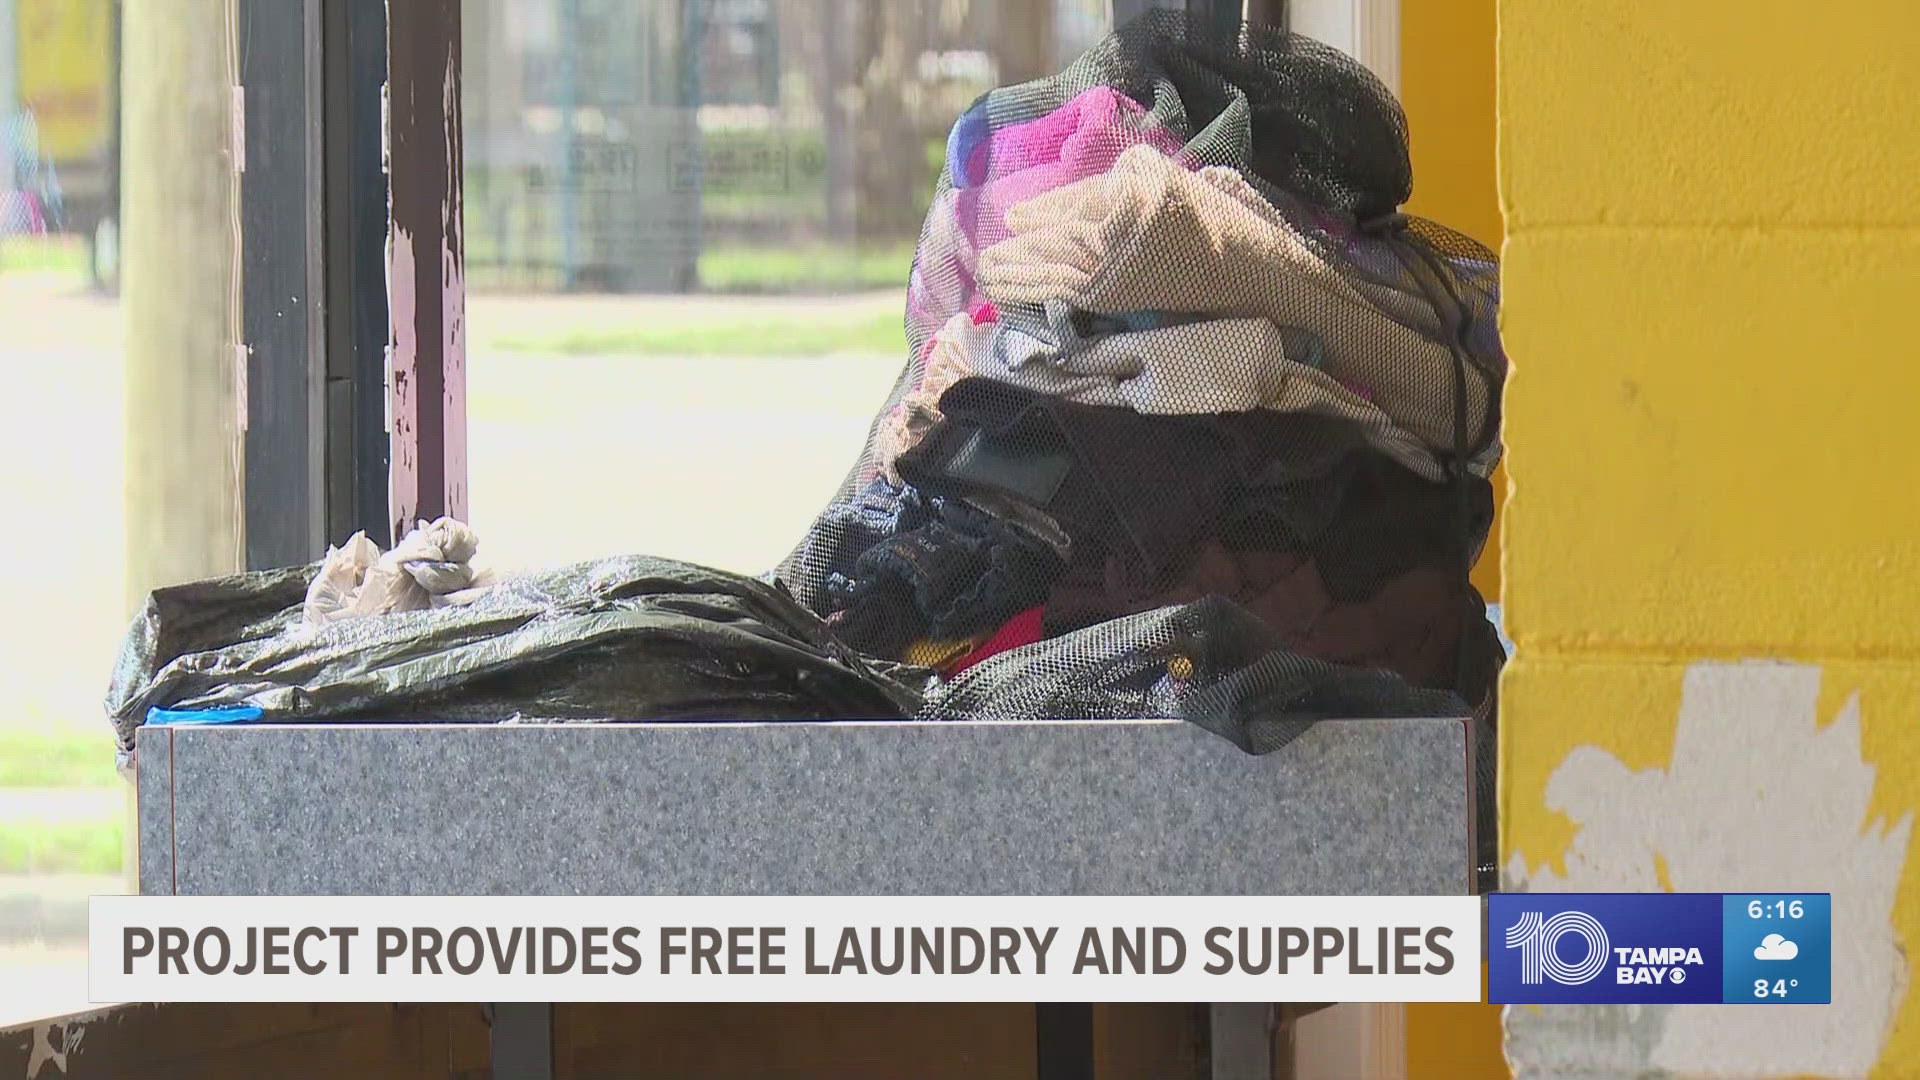 So far, "The Laundry Project" has helped clean nearly 3 million pounds of laundry in 65 cities across the U.S.